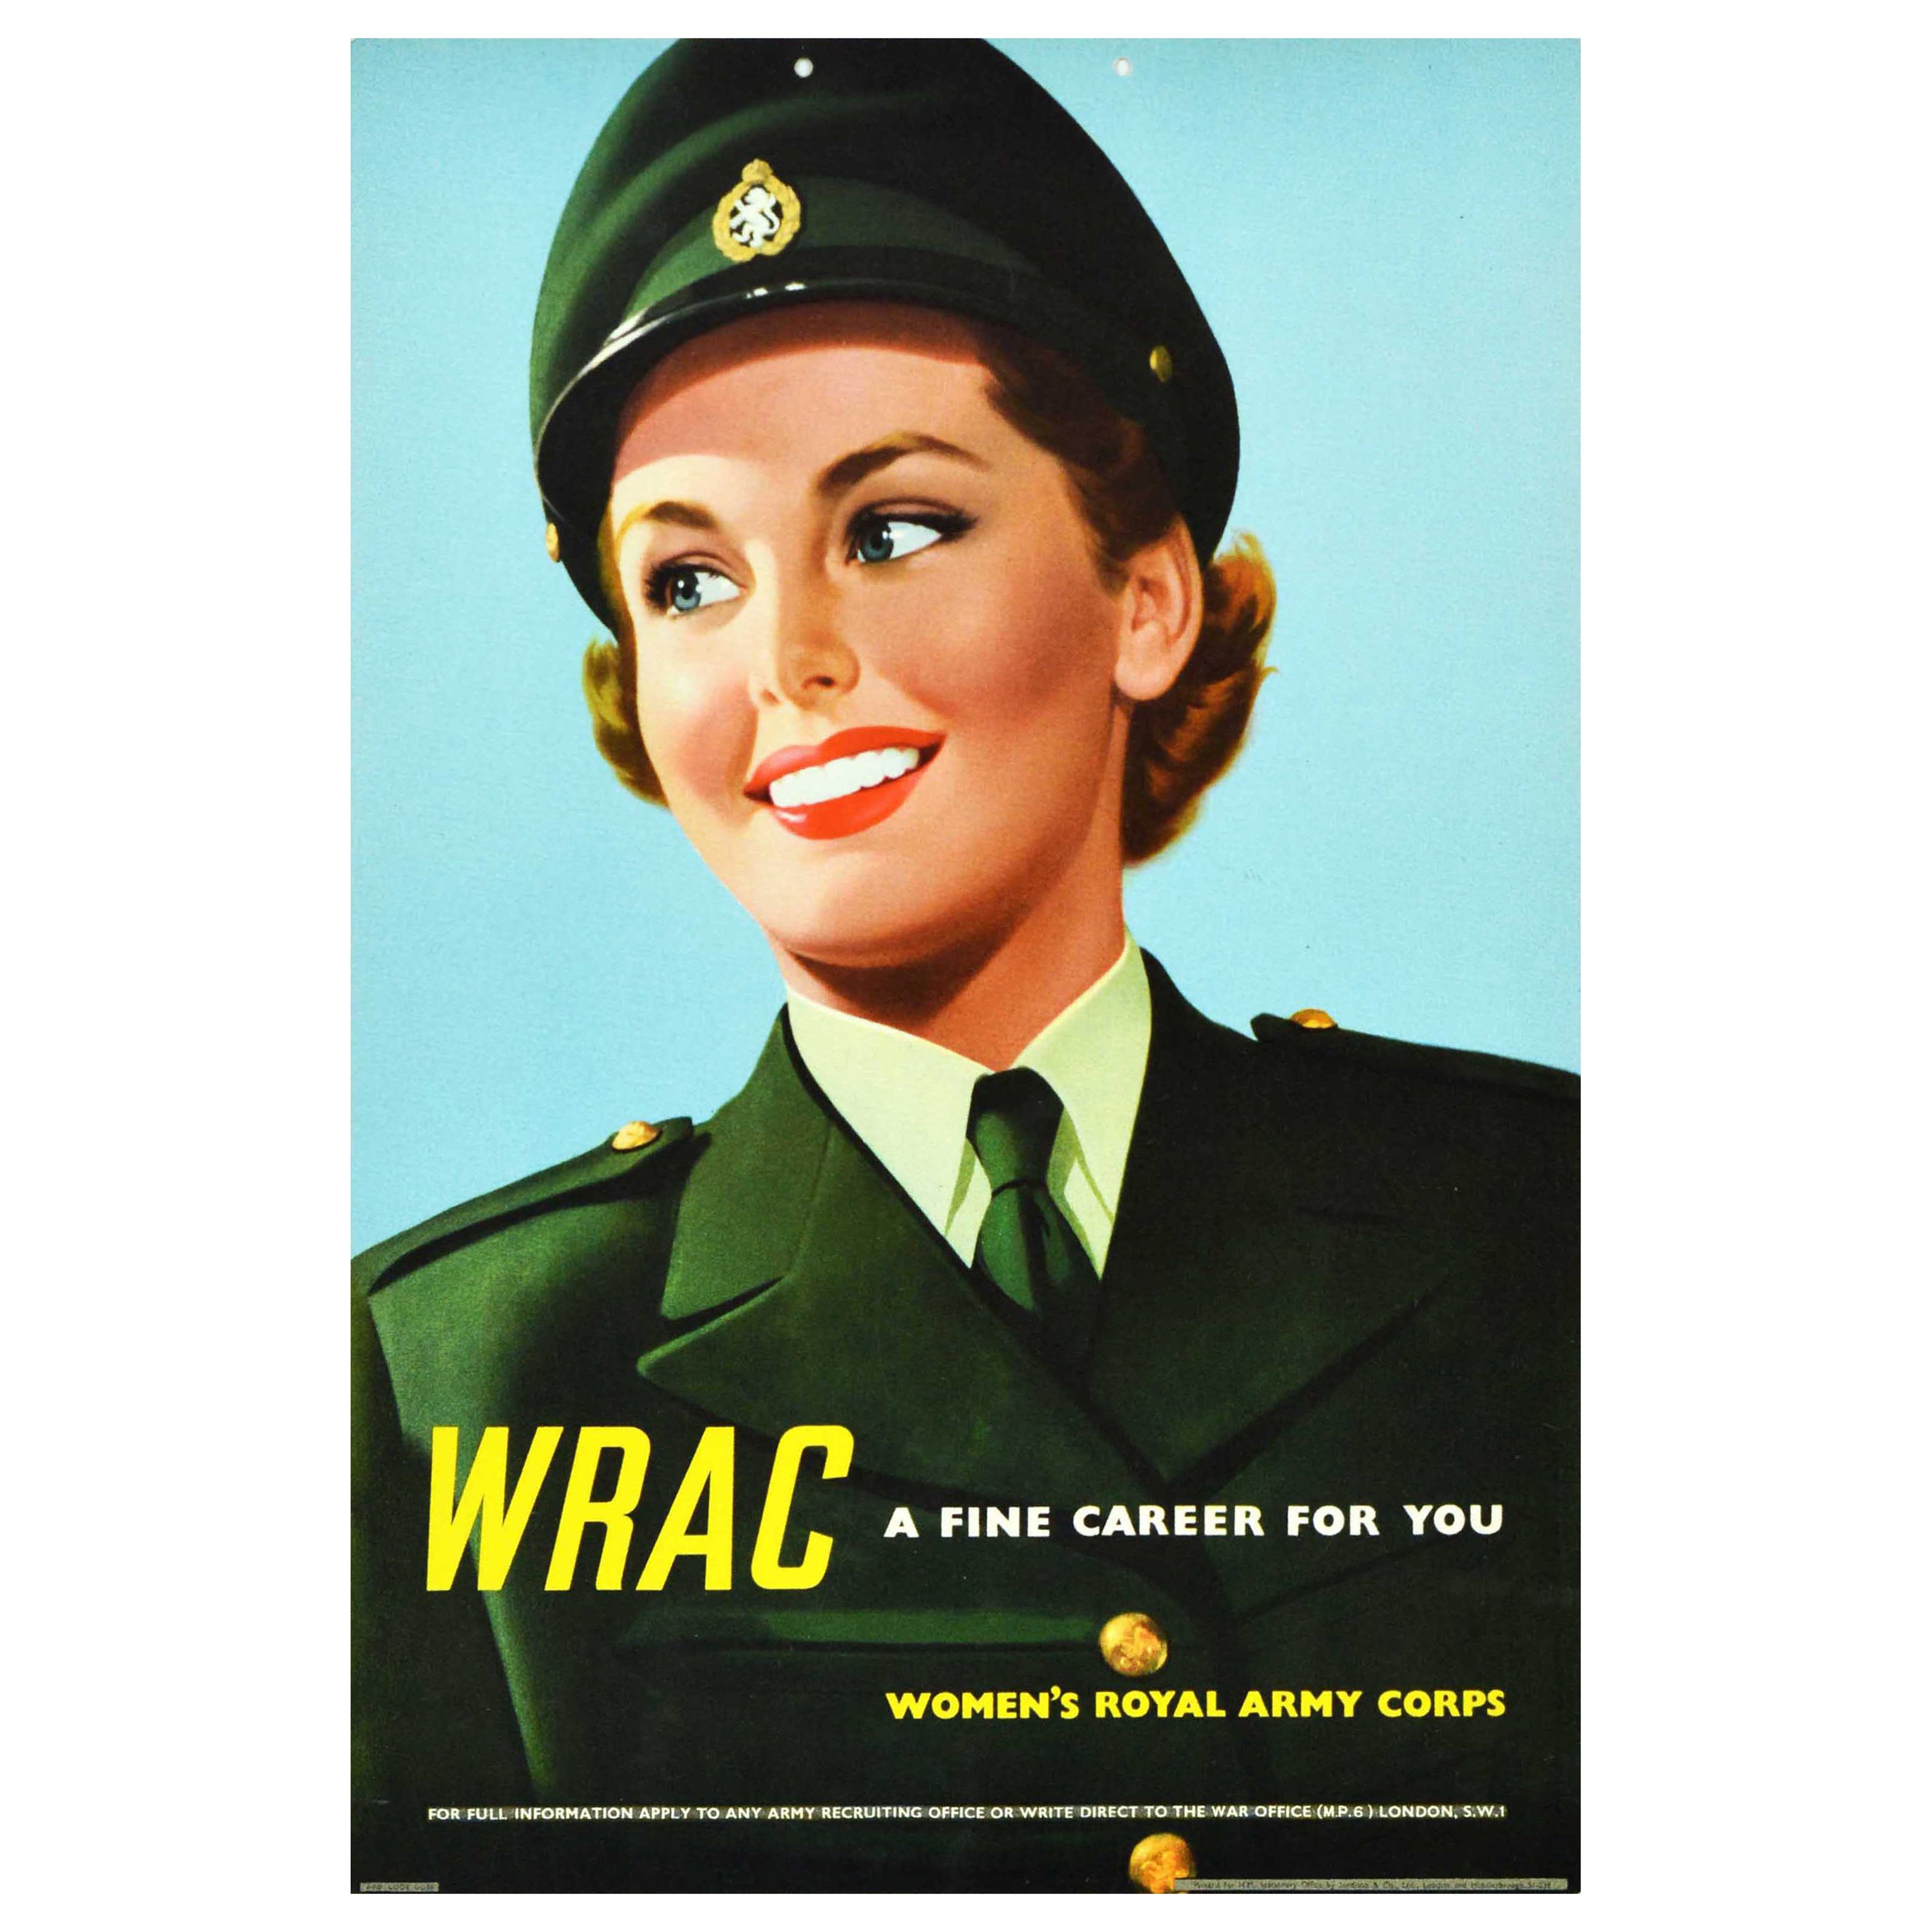 Original Vintage Military Poster WRAC A Fine Career Women's Royal Army Corp UK For Sale